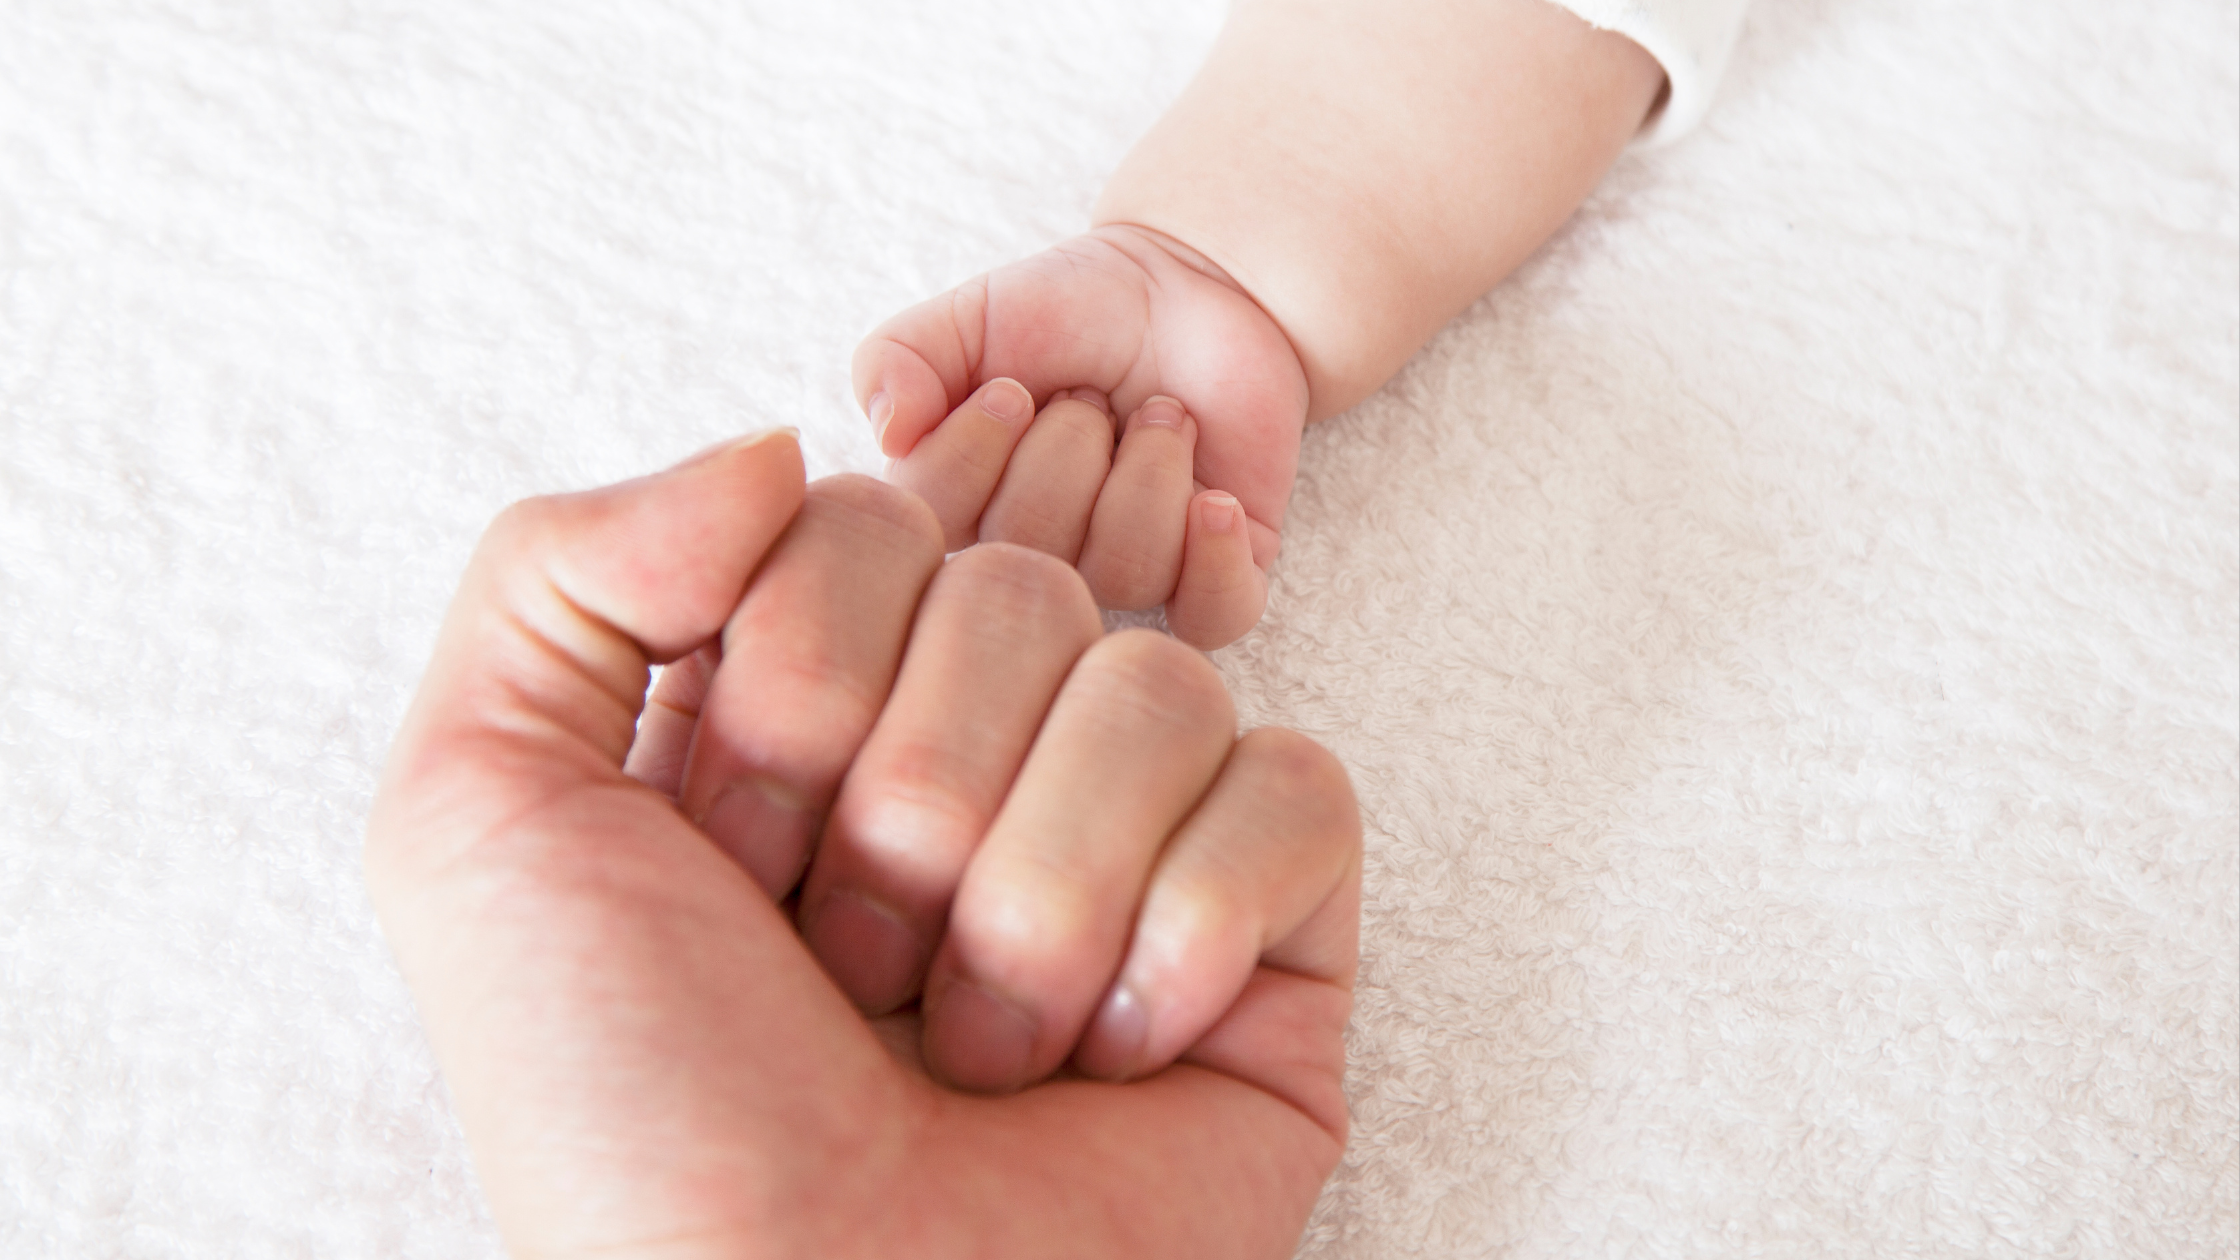 A parent and baby touch hands